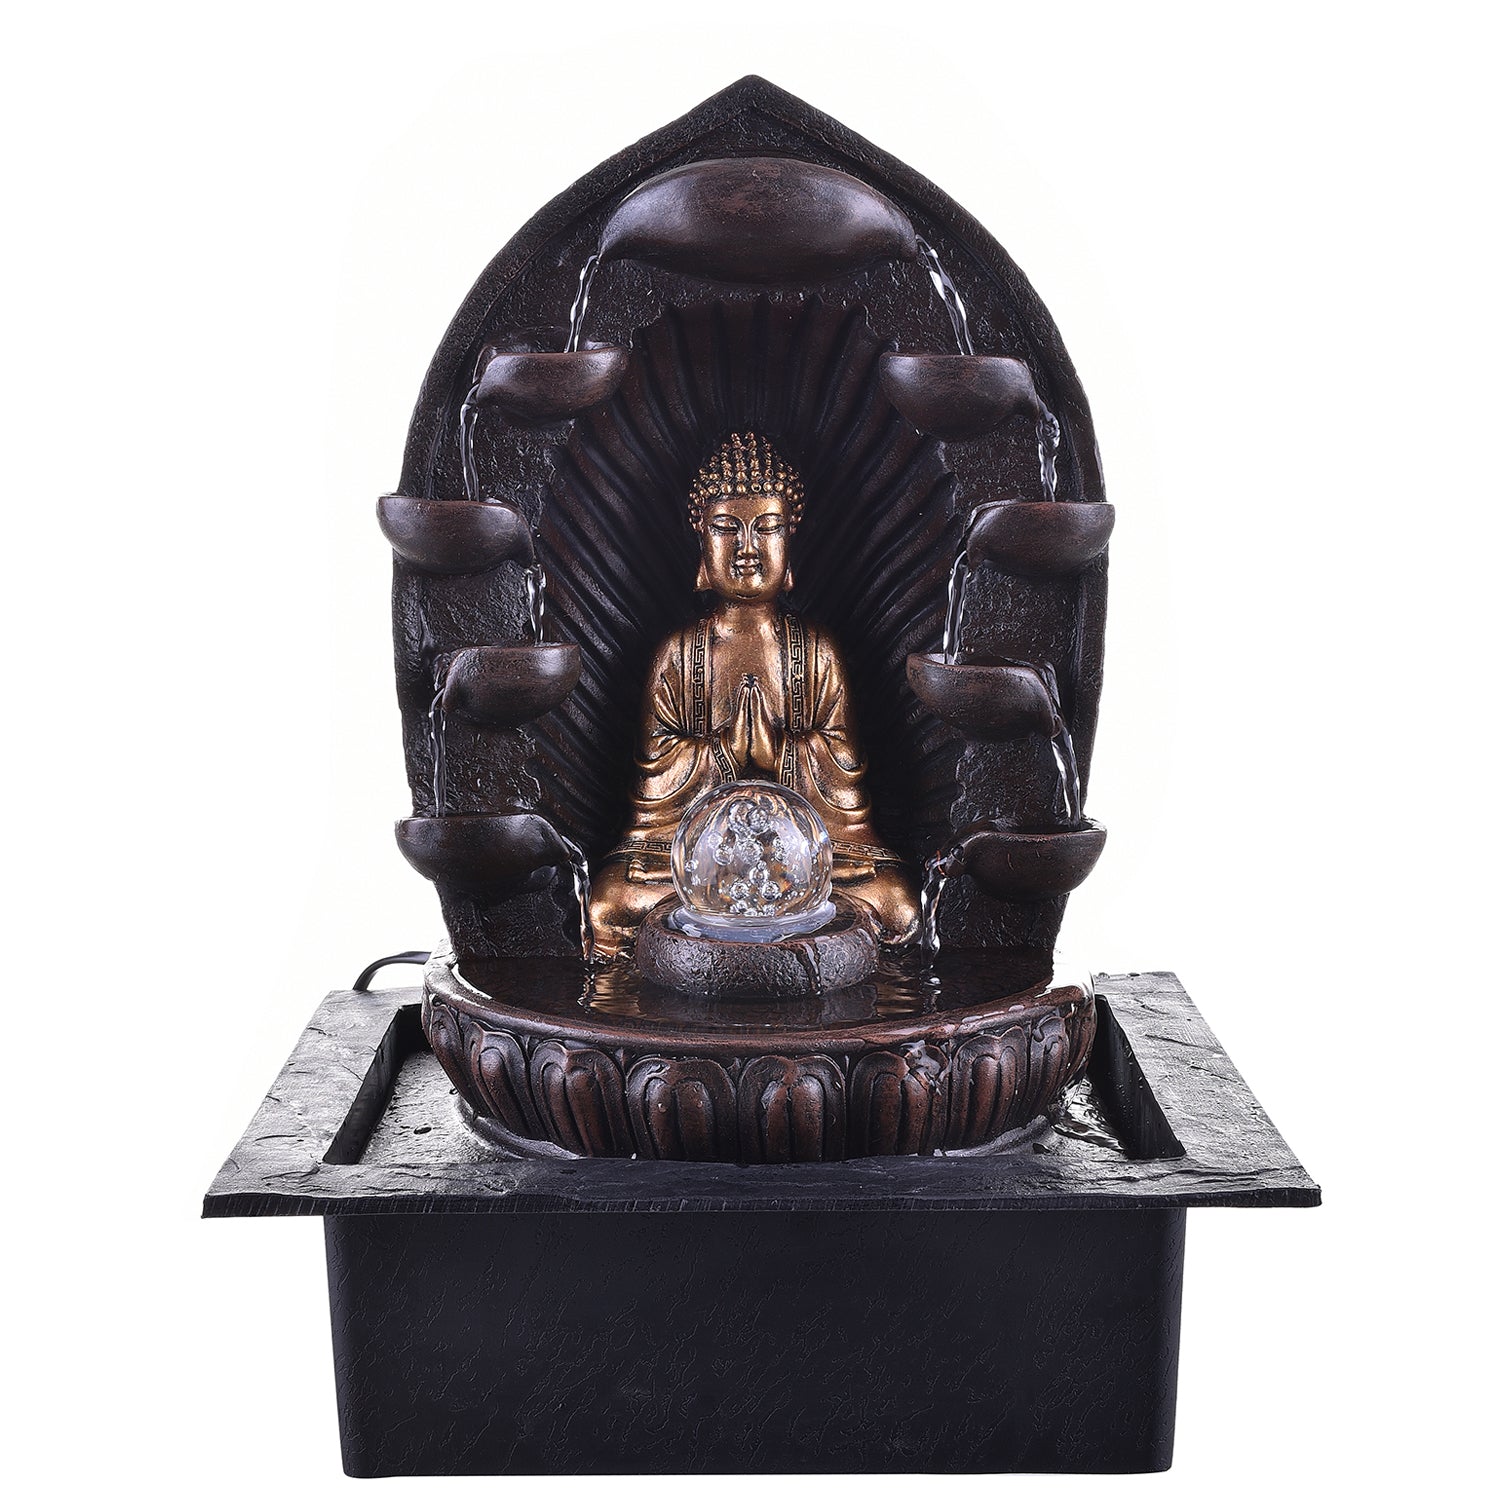 Polystone Brown Textured Meditating Lord Buddha Statue With Crystal Ball Water Fountain for Home/Office Décor 3